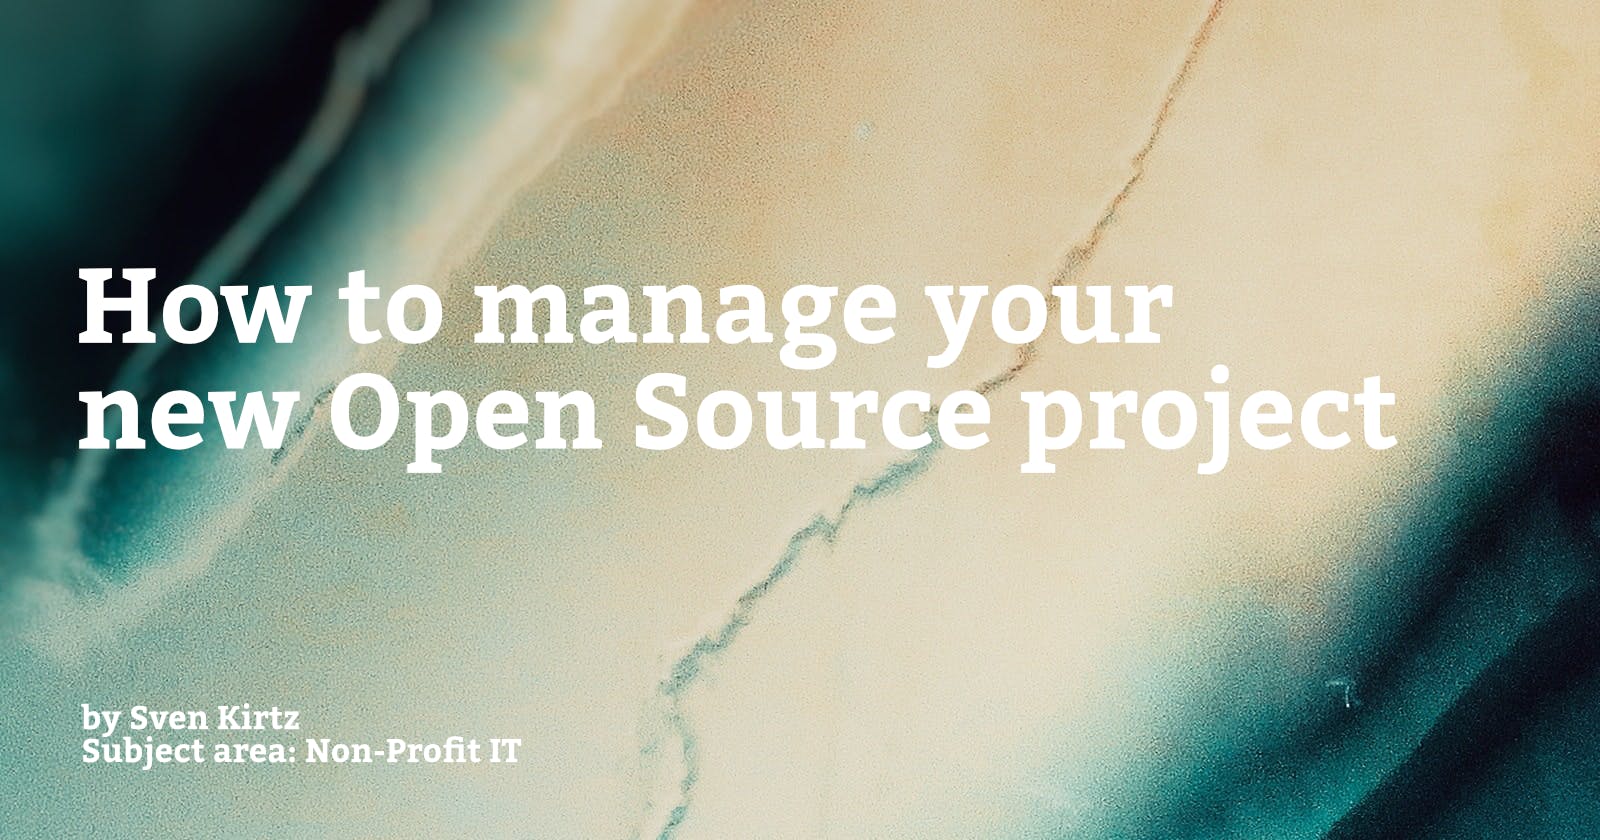 How to manage your new open source project